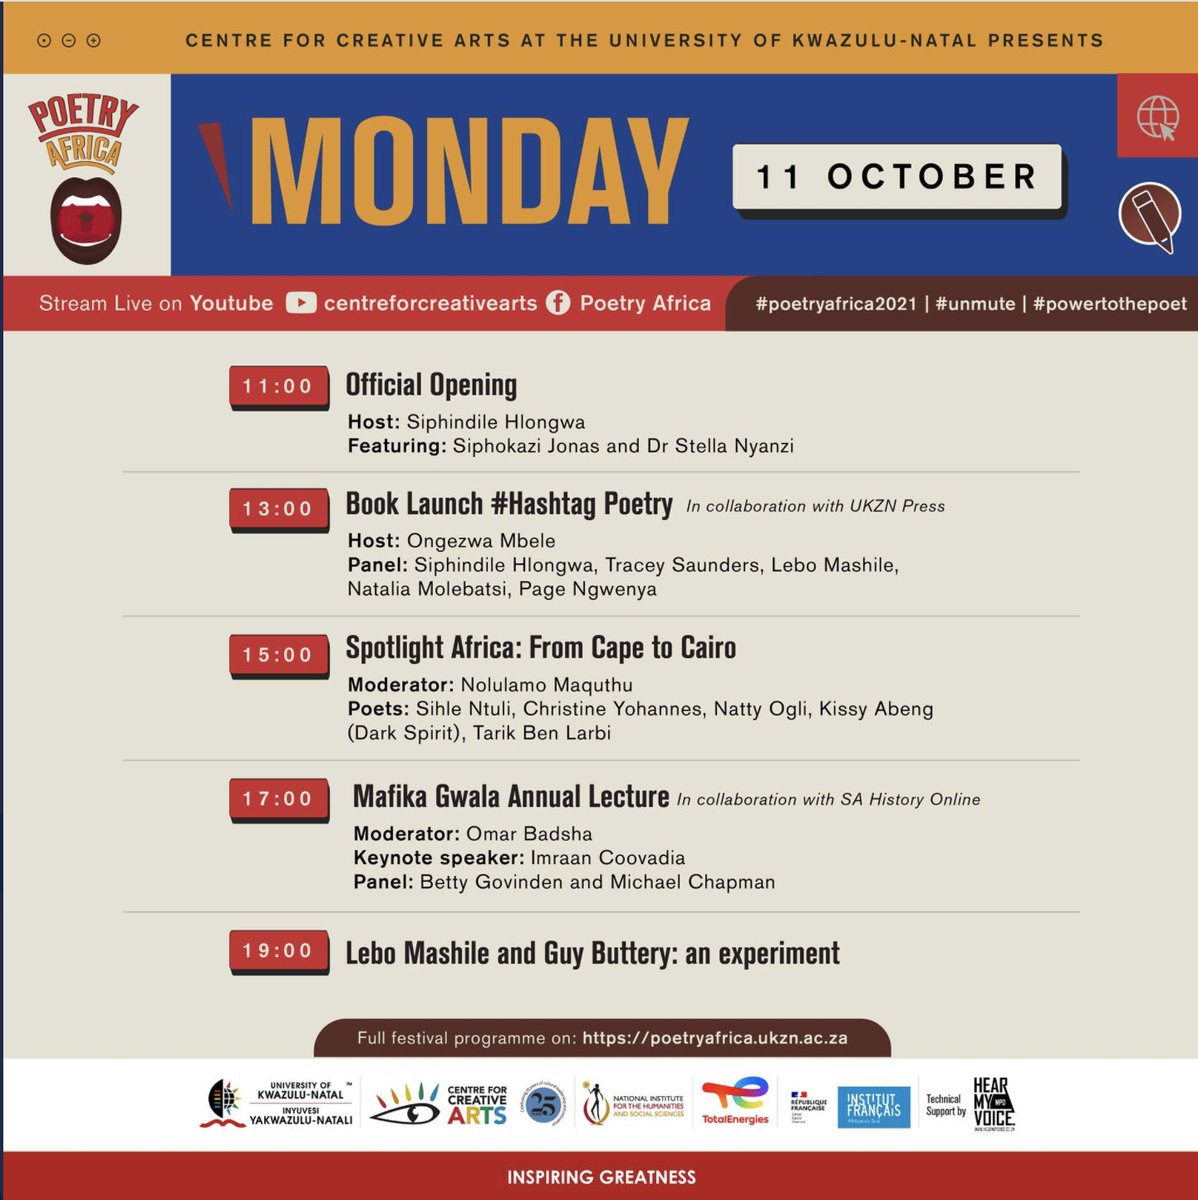 Another year of @PoetryAfrica International Poetry Festival kicks off today with the theme #PowerToThePoet. 

Congratulations @ukzncca for a FIRE line up!
#PoetryWins #Unmuted